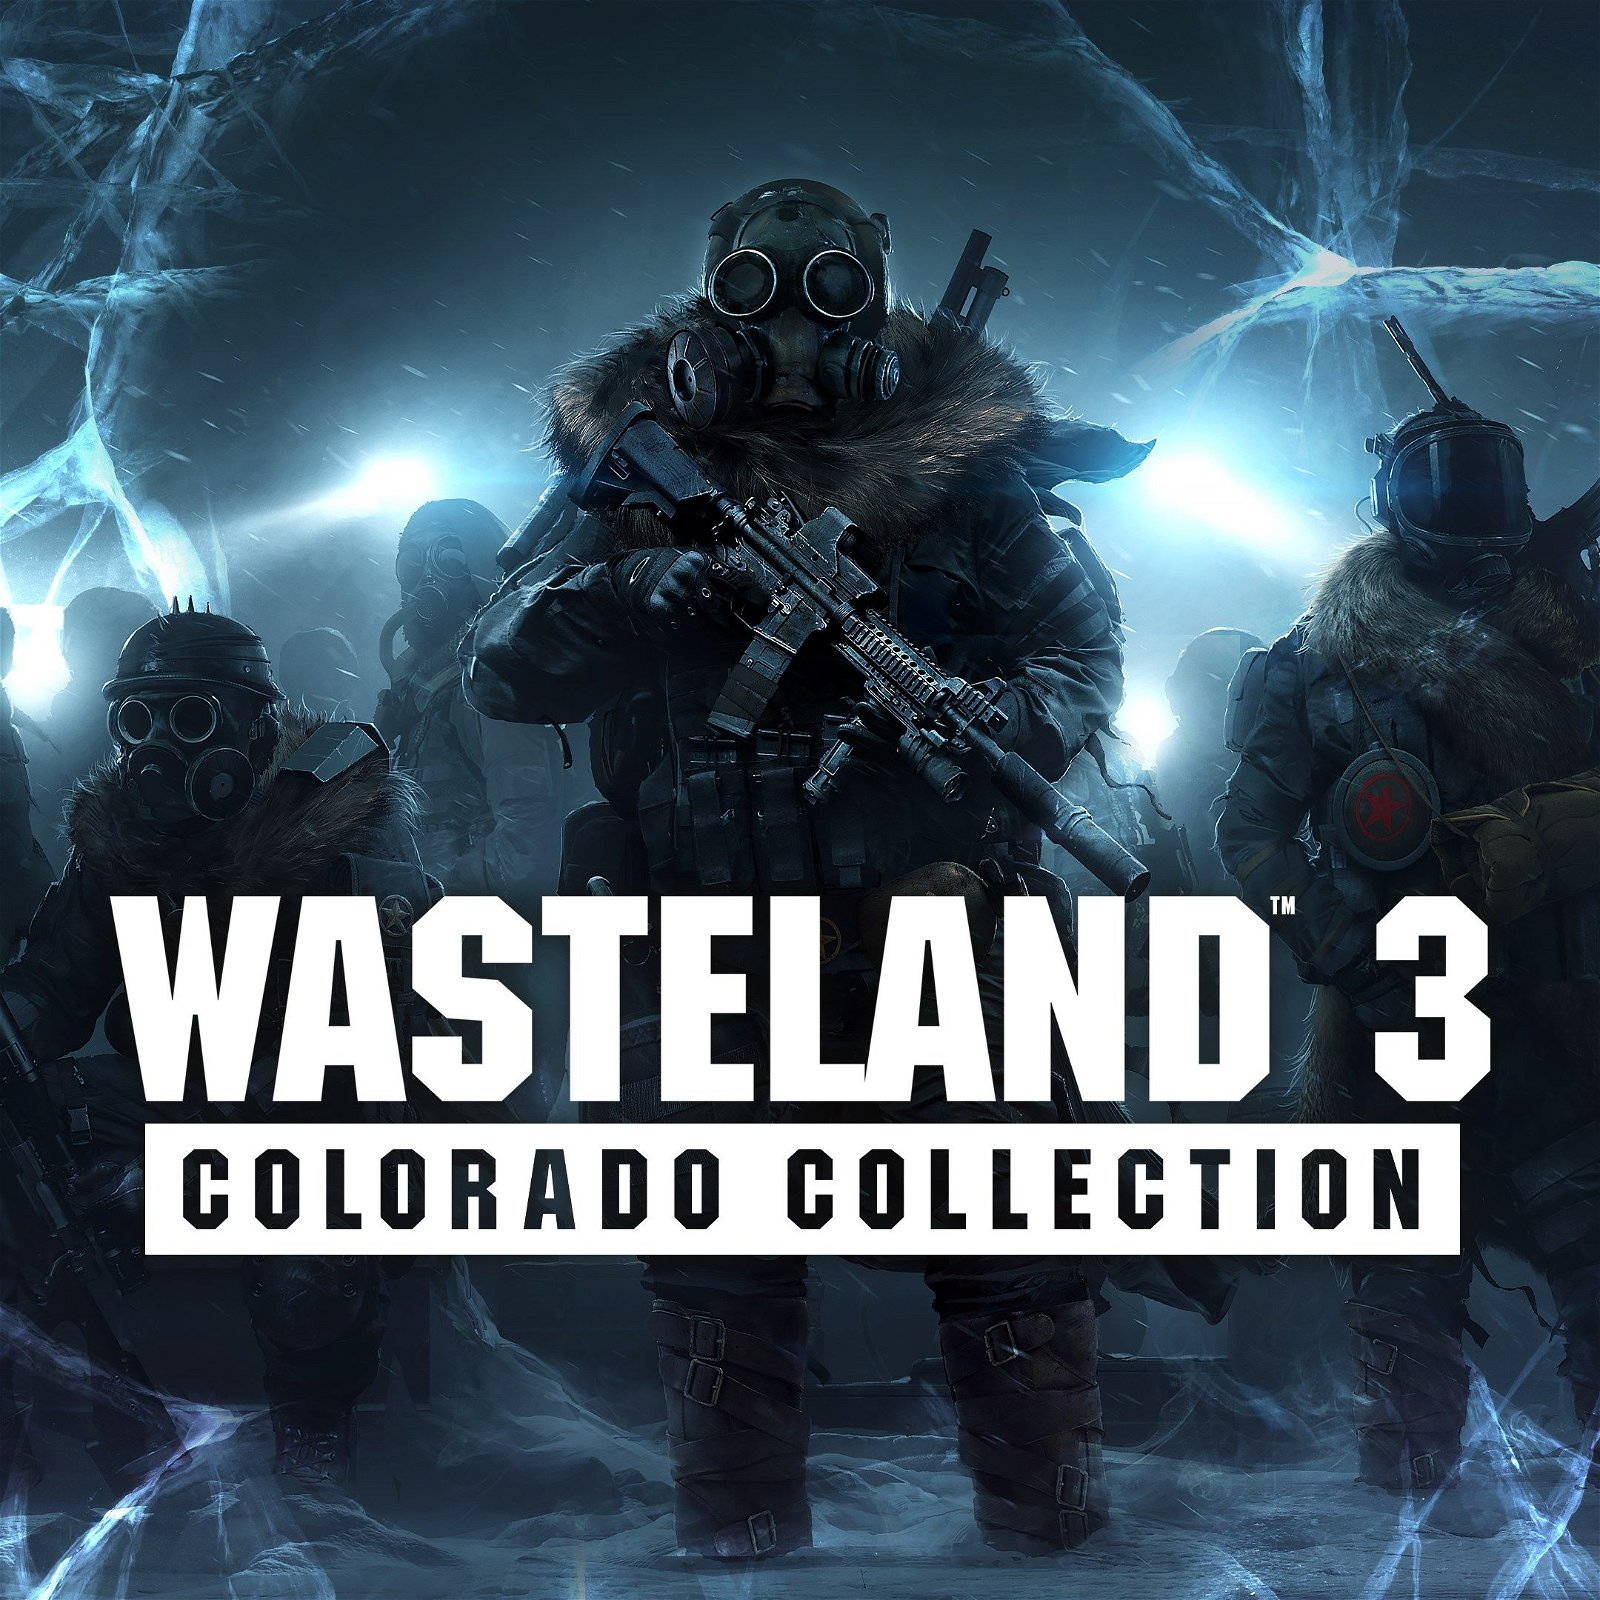 Image of Wasteland 3 (PC) Colorado Collection